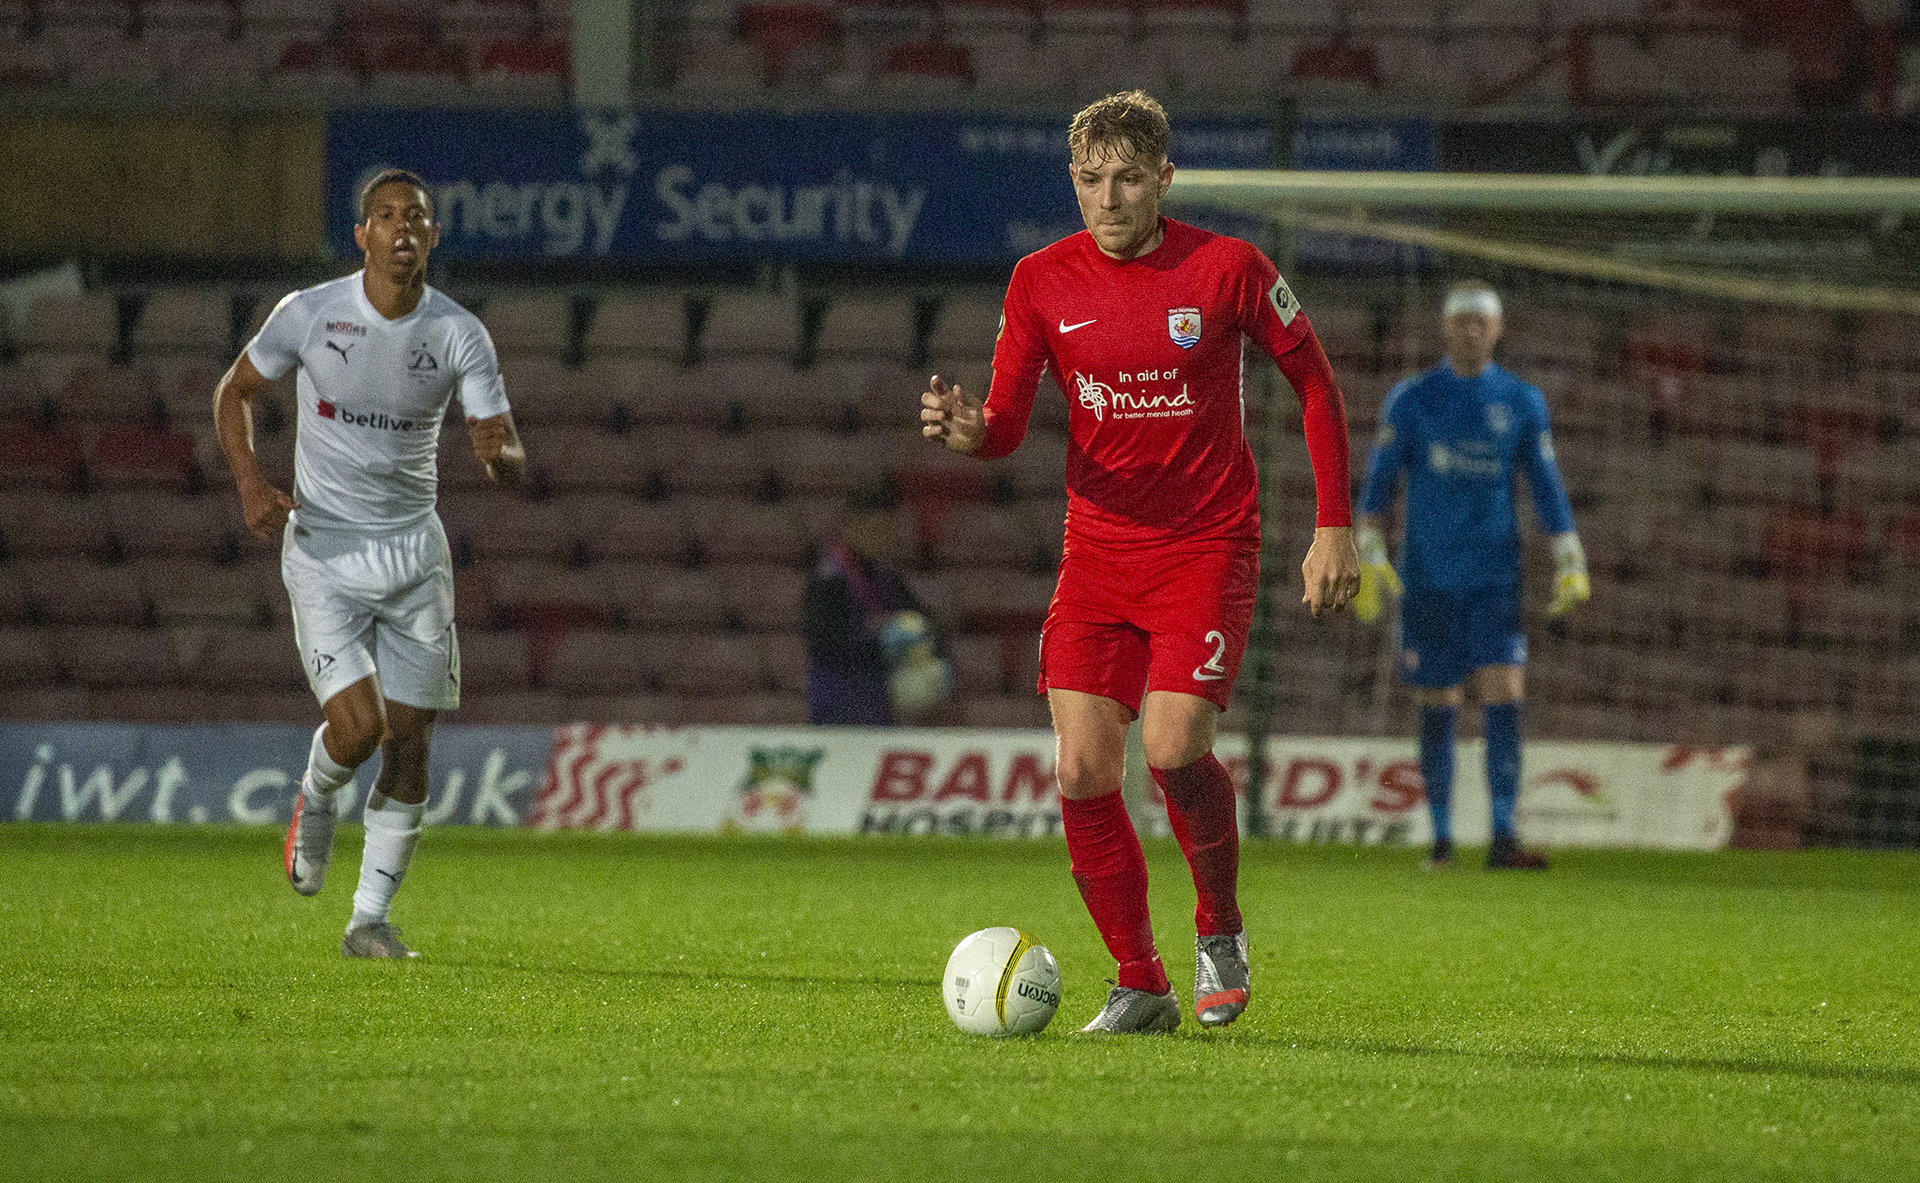 John Disney brings the ball out of defence for The Nomads | © NCM Media